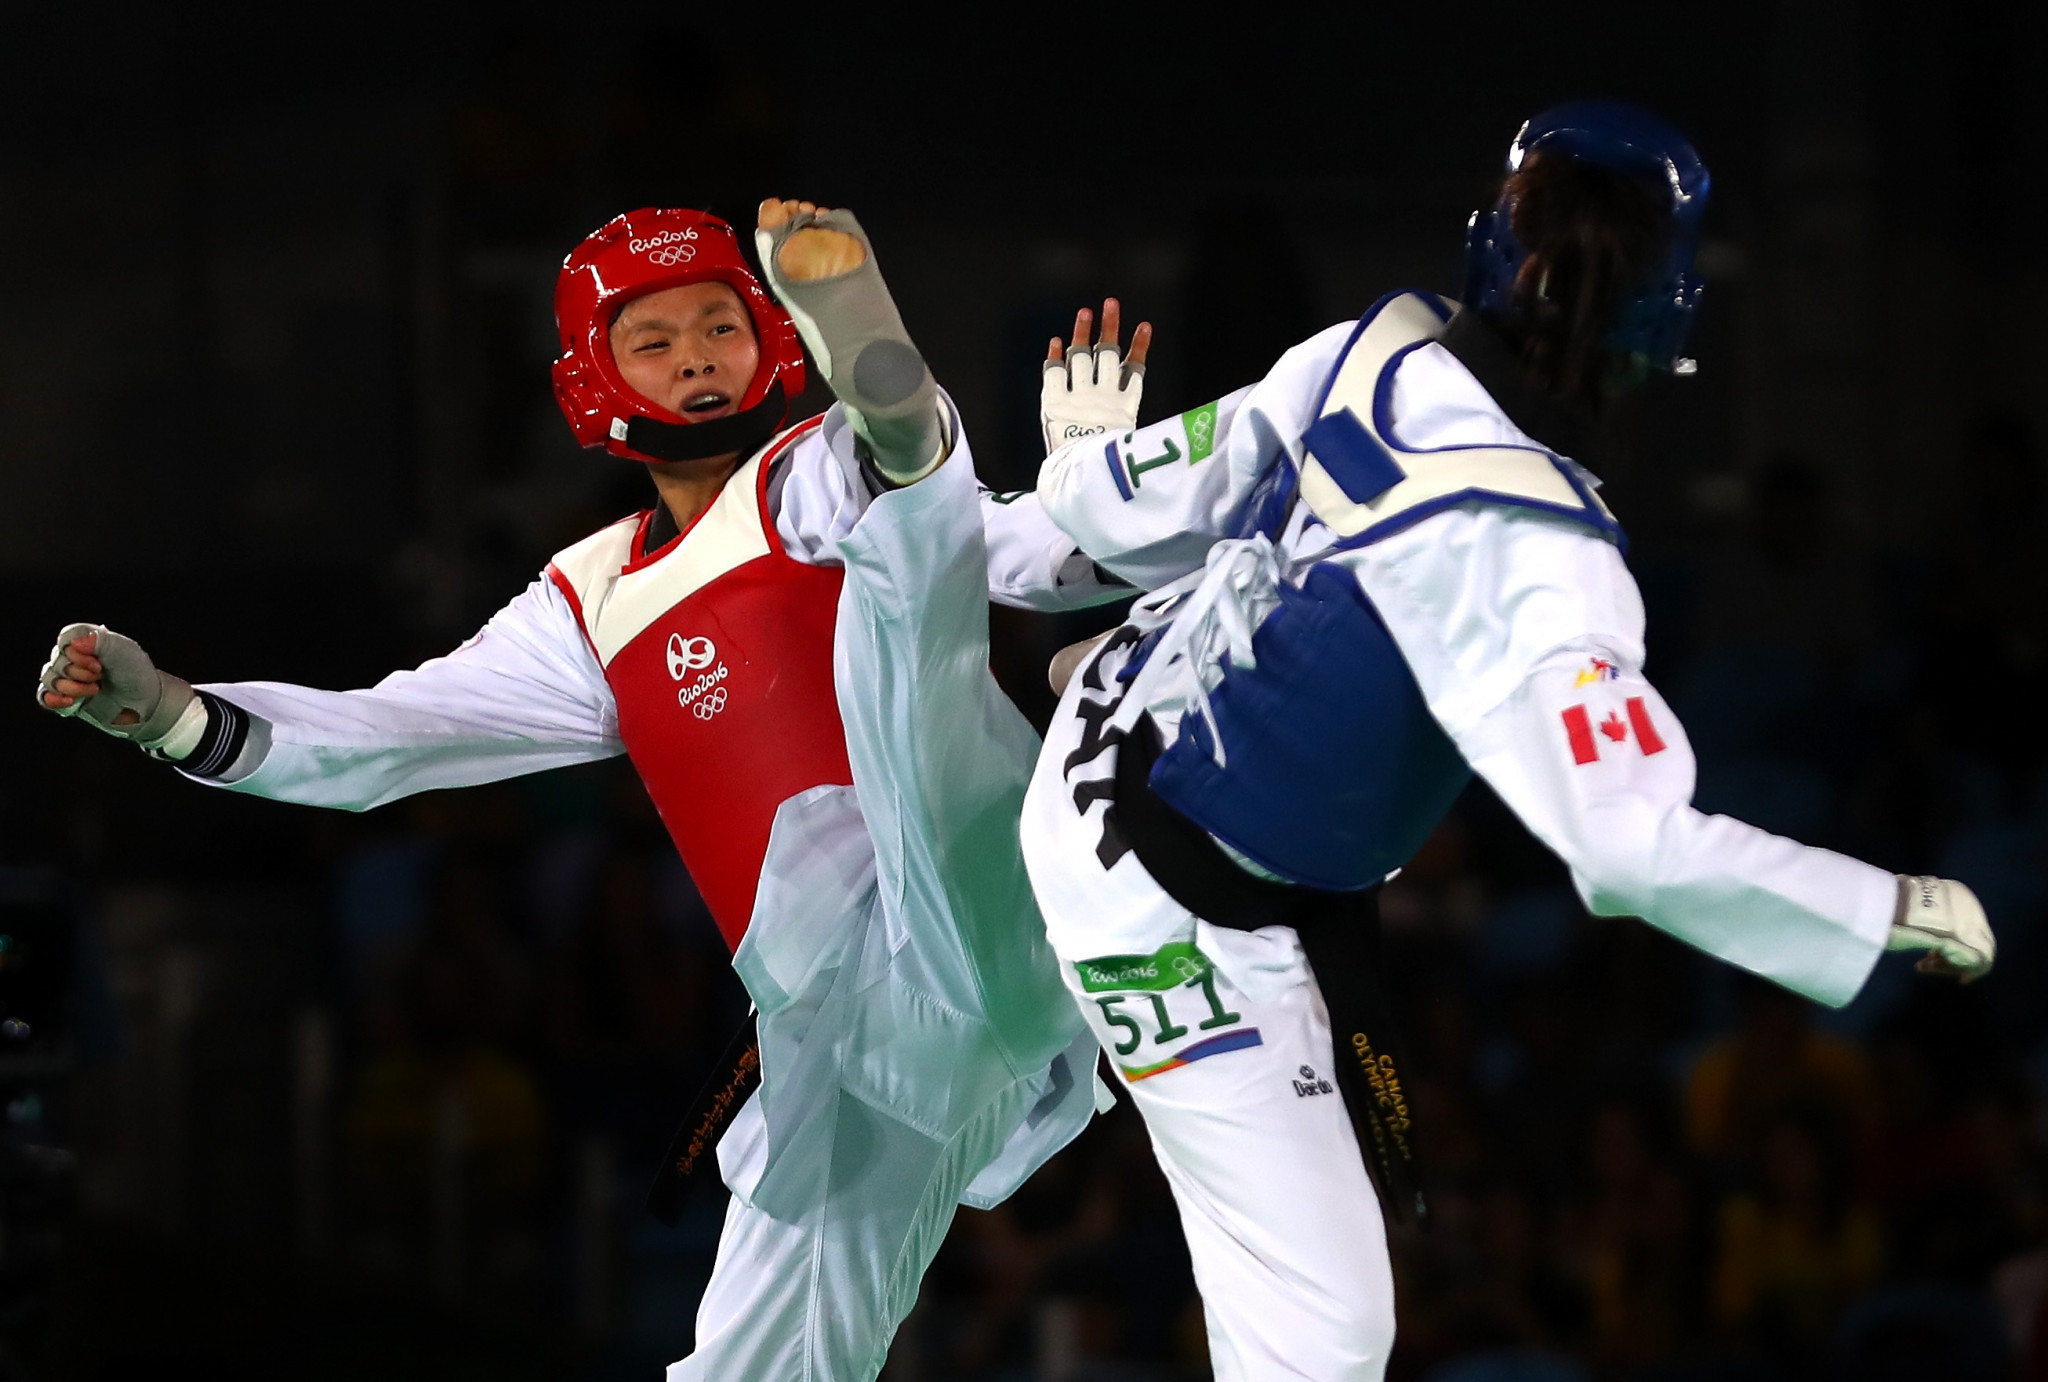 Shin Wook Lim was an official coach for Taekwondo Canada at two Olympics  ©Getty Images